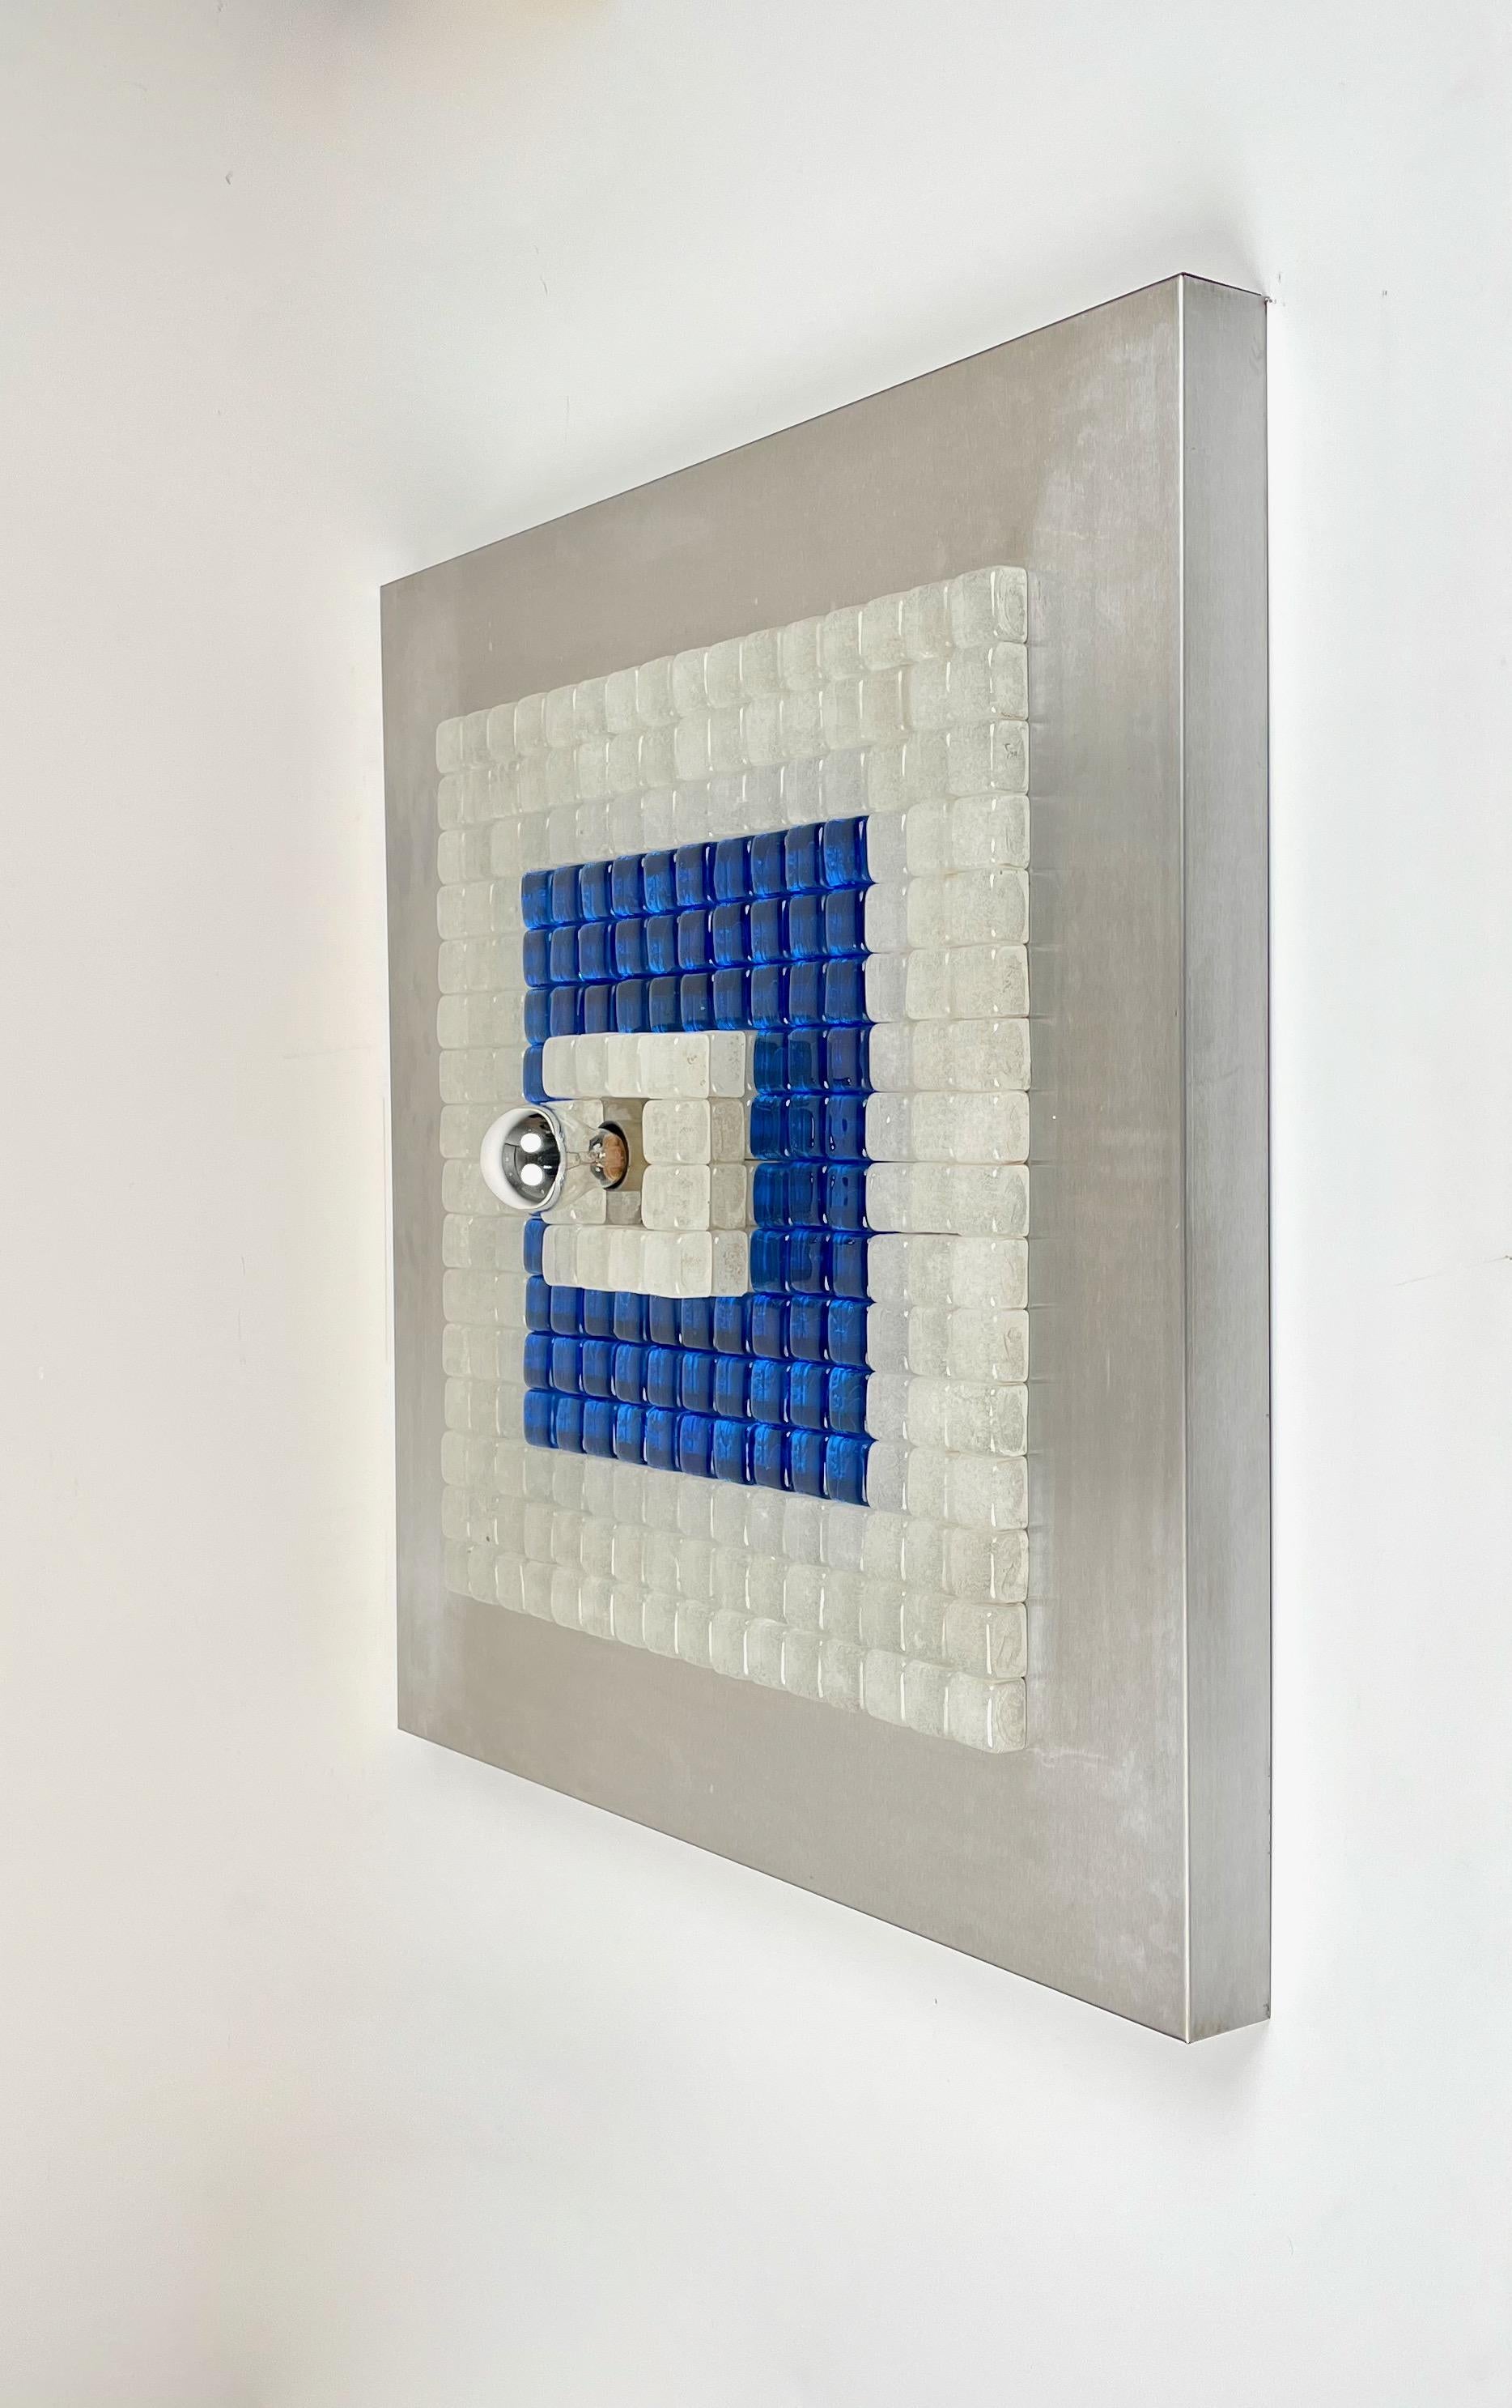 Large squared wall light sconce by Albano Poli for Poliarte made in Italy in the 1970s. 

This astonishing sconce sculpture features a squared base in steel covered by white and blue Murano glass squares with a single light bulb in the centre.